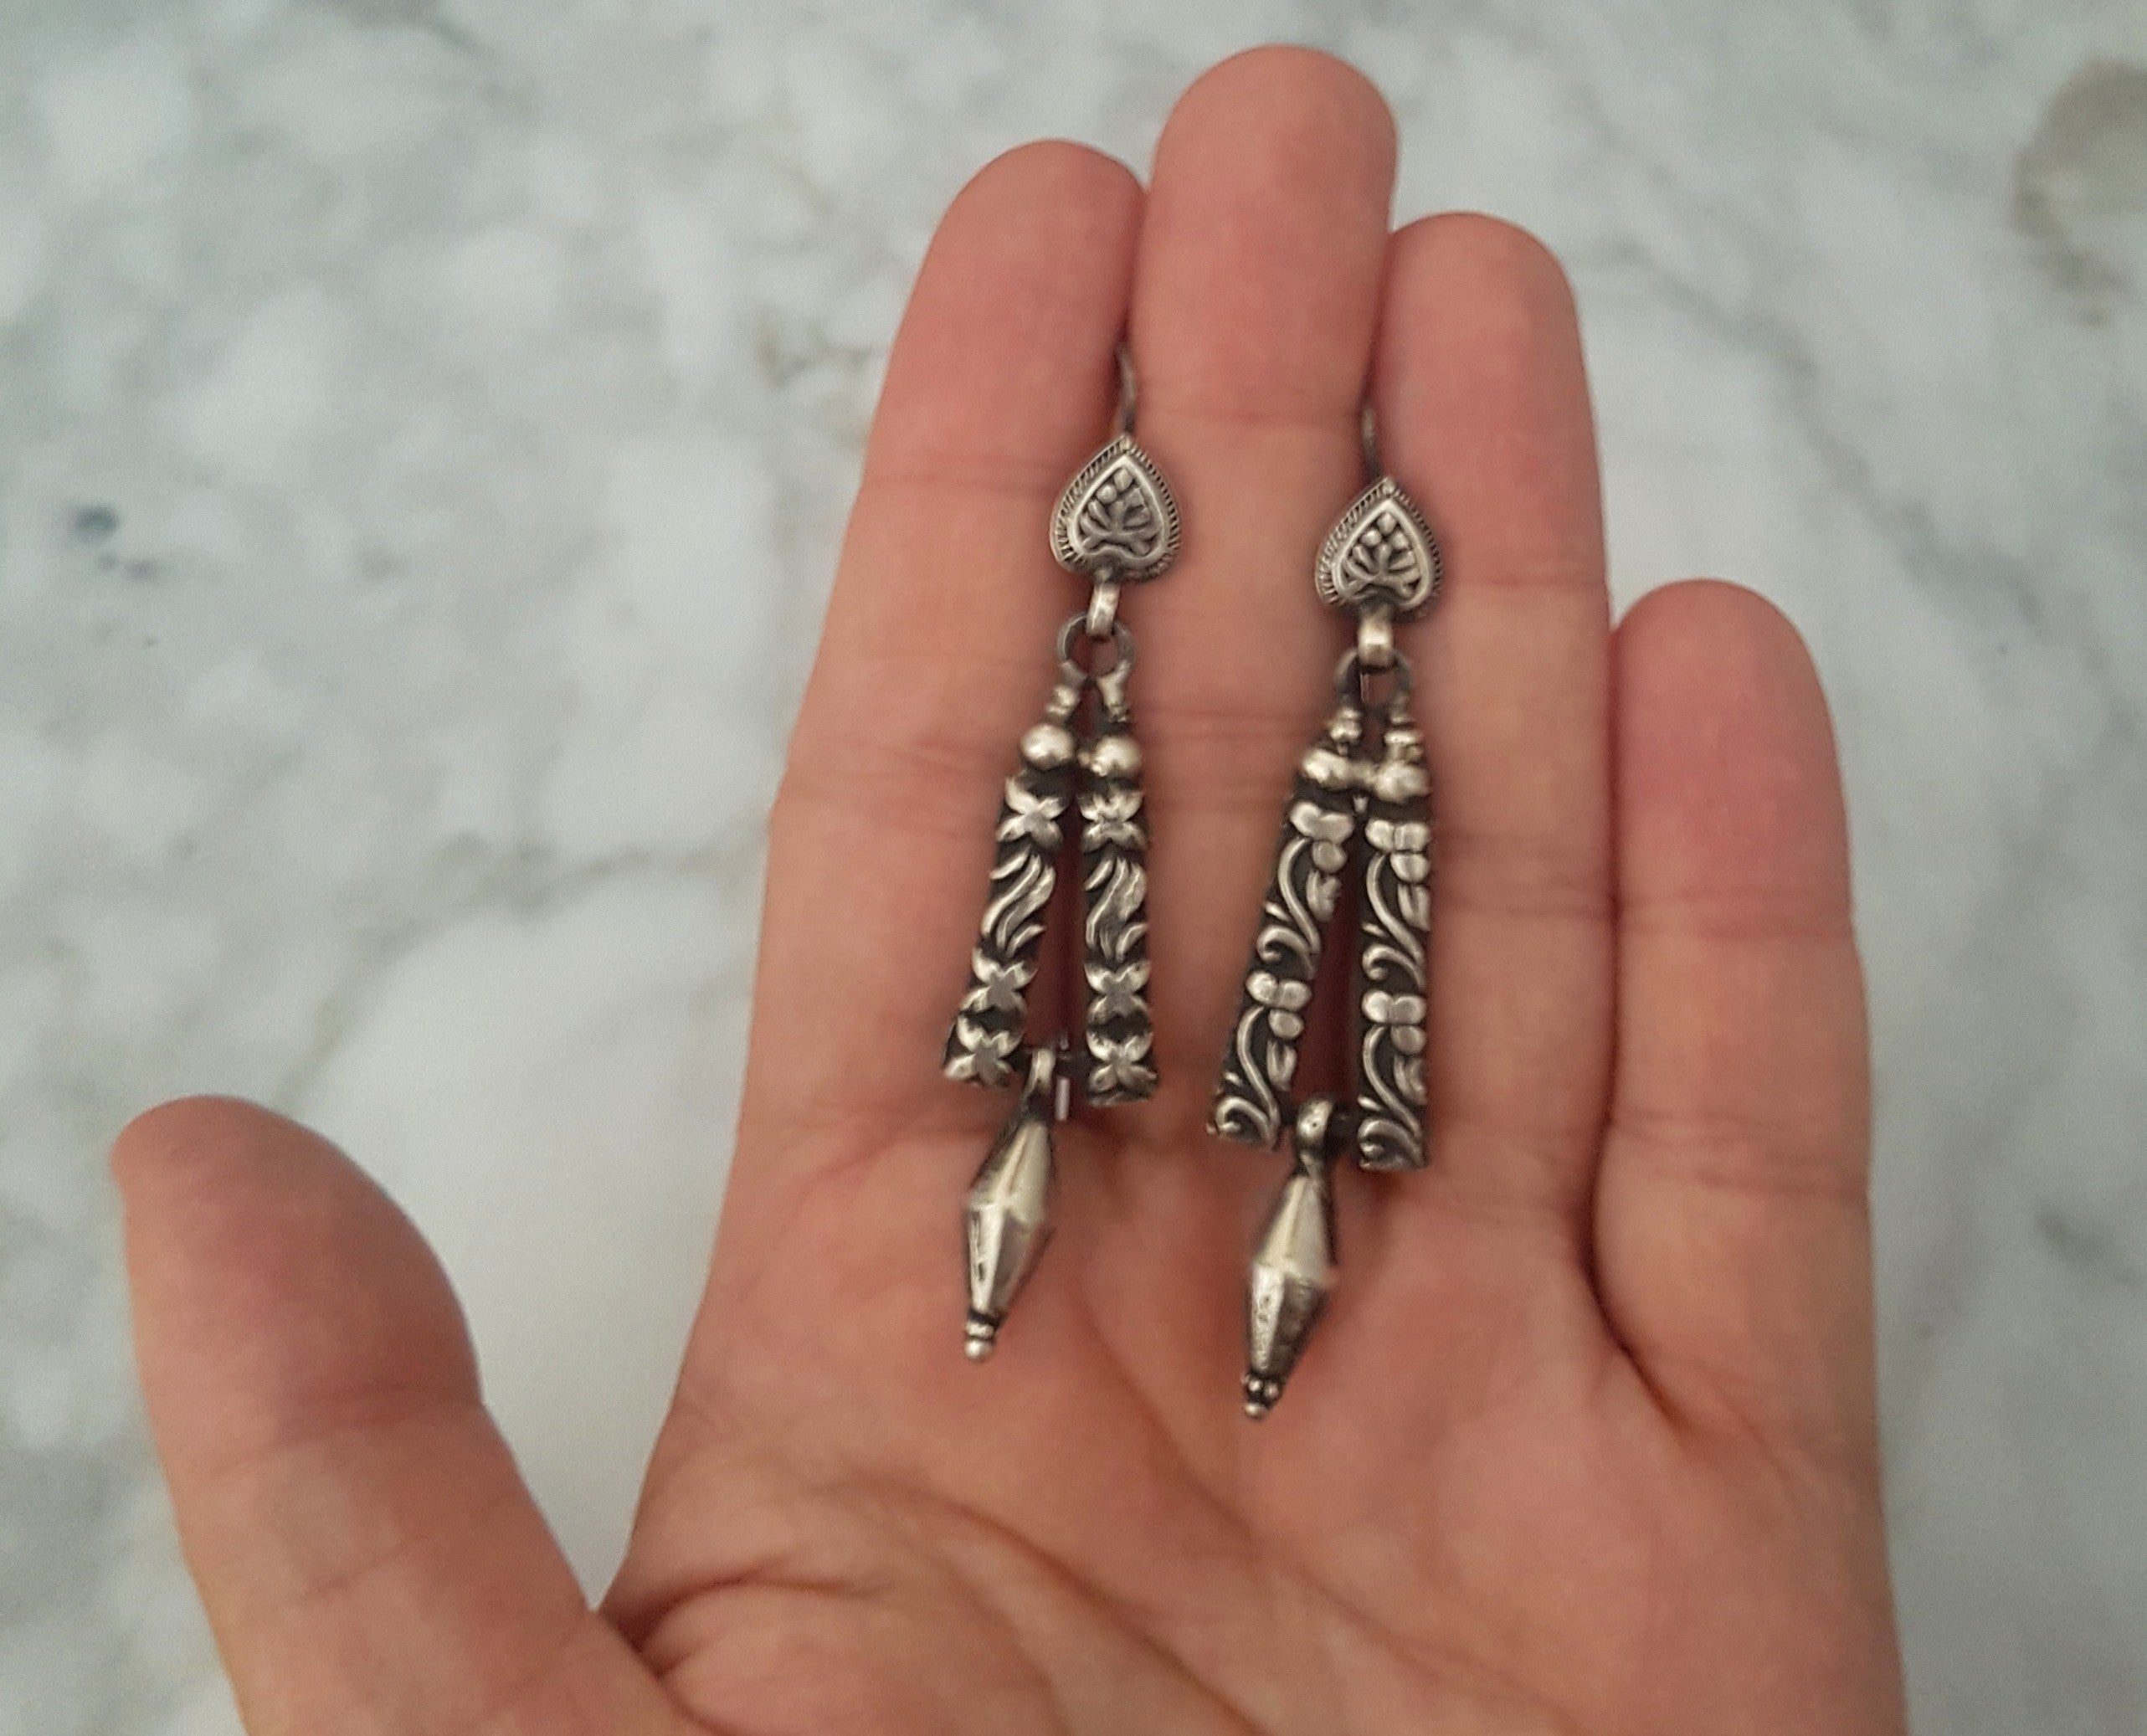 Rajasthani Silver Earrings with Dangle